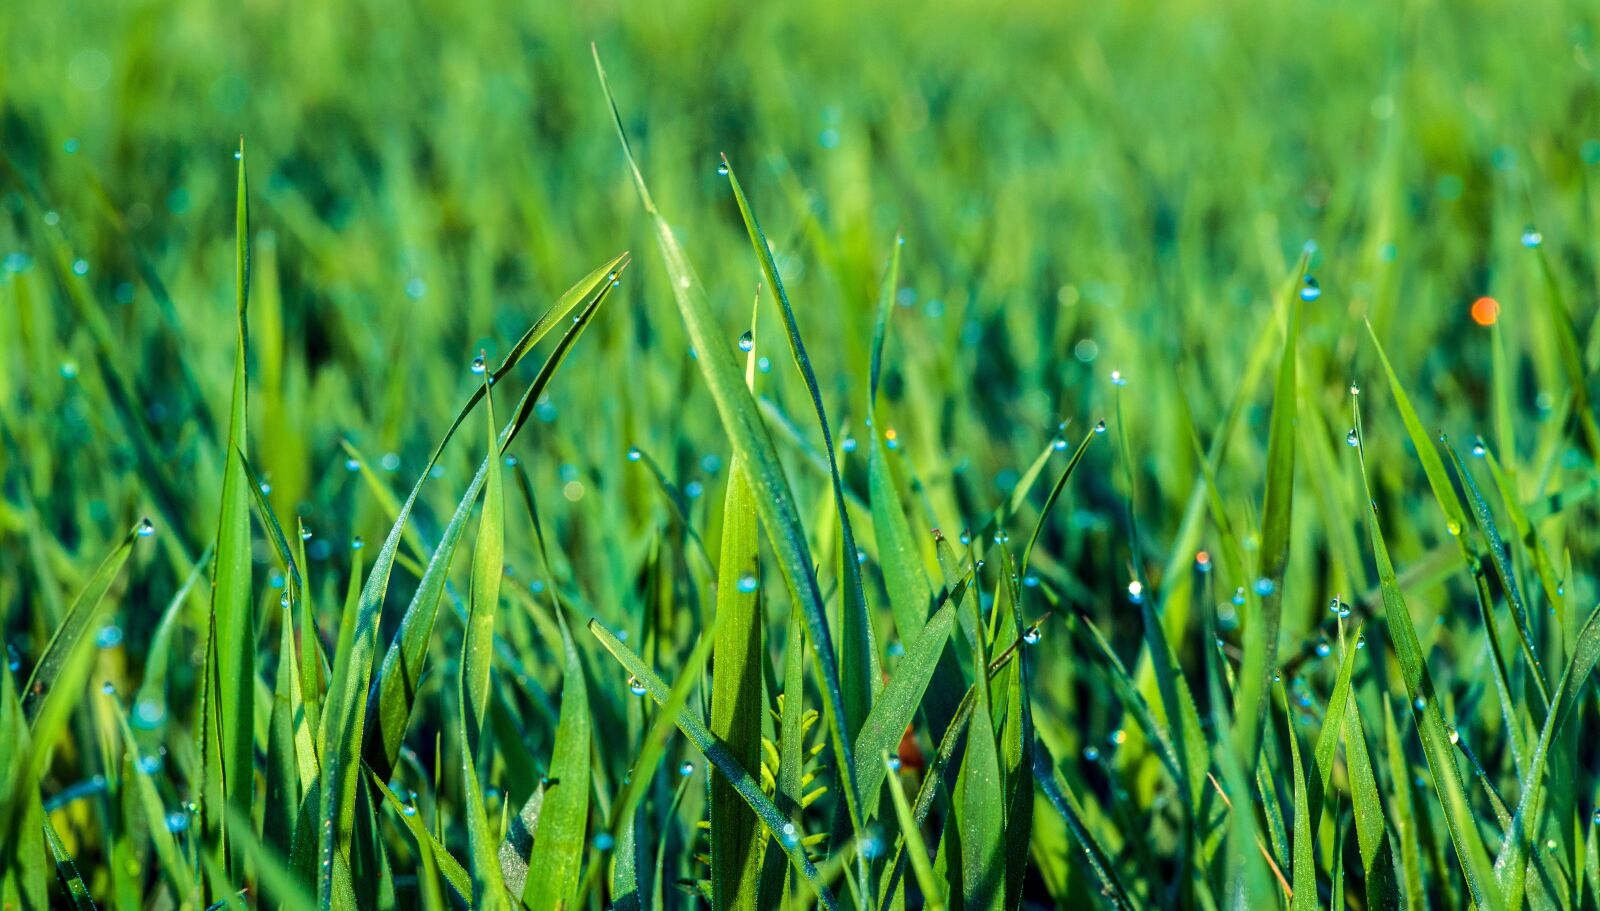 Pentax K-S2 sample photo. Green grass, lawn, juicy photography